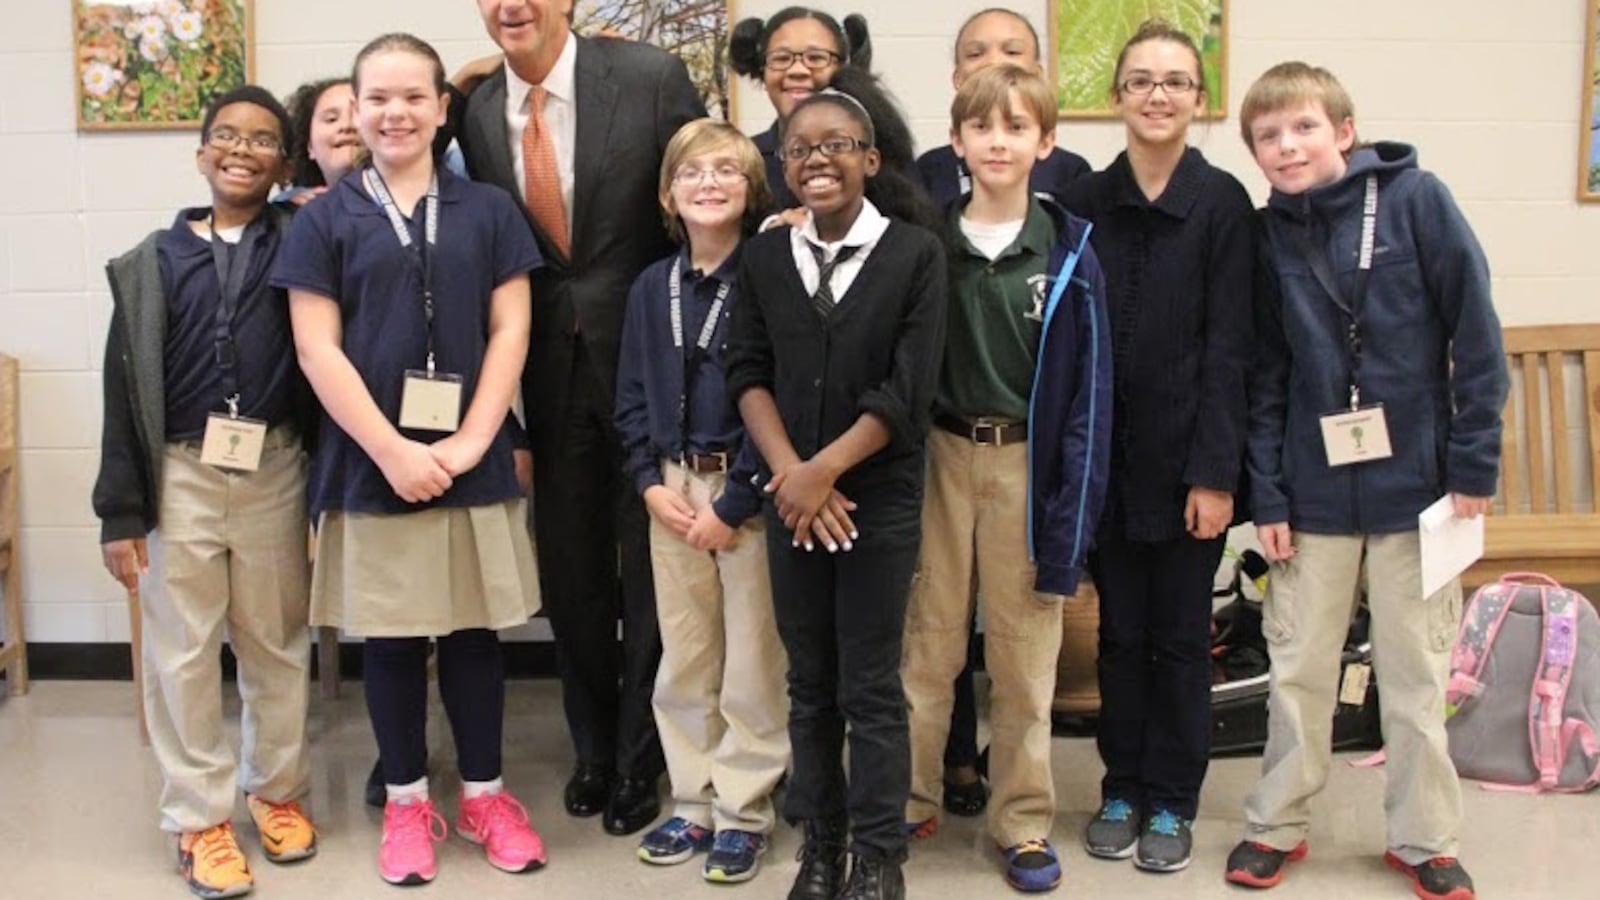 Gov. Bill Haslam poses in October with students at Riverwood Elementary School in Cordova, where he celebrated Tennessee's 2015 NAEP results.